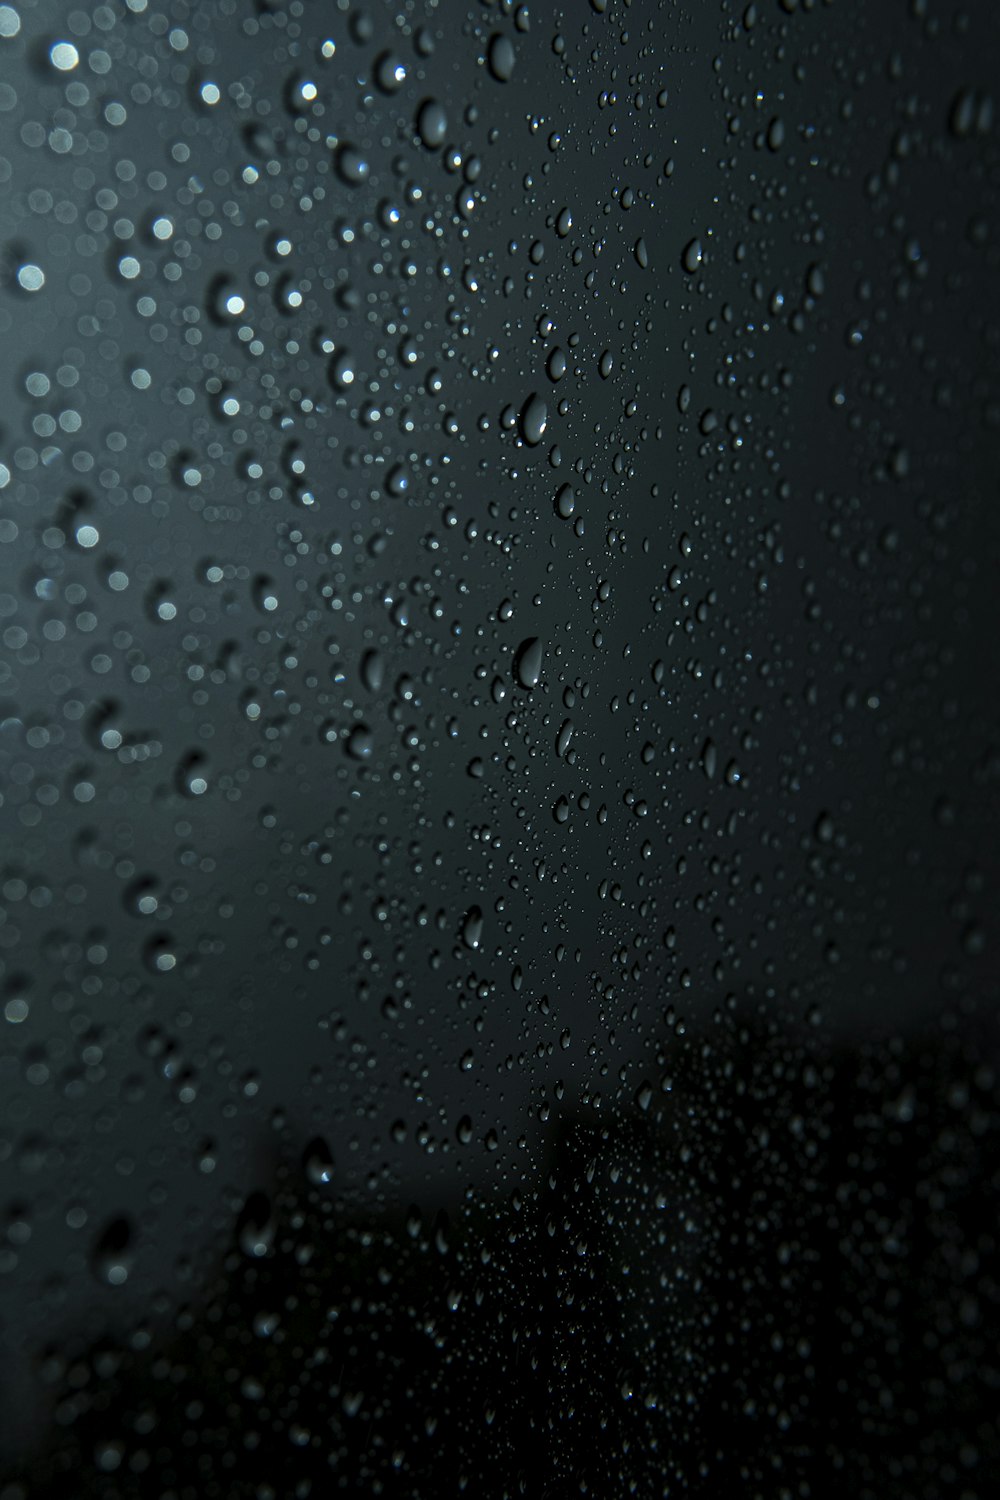 rain drops on a window with a dark background